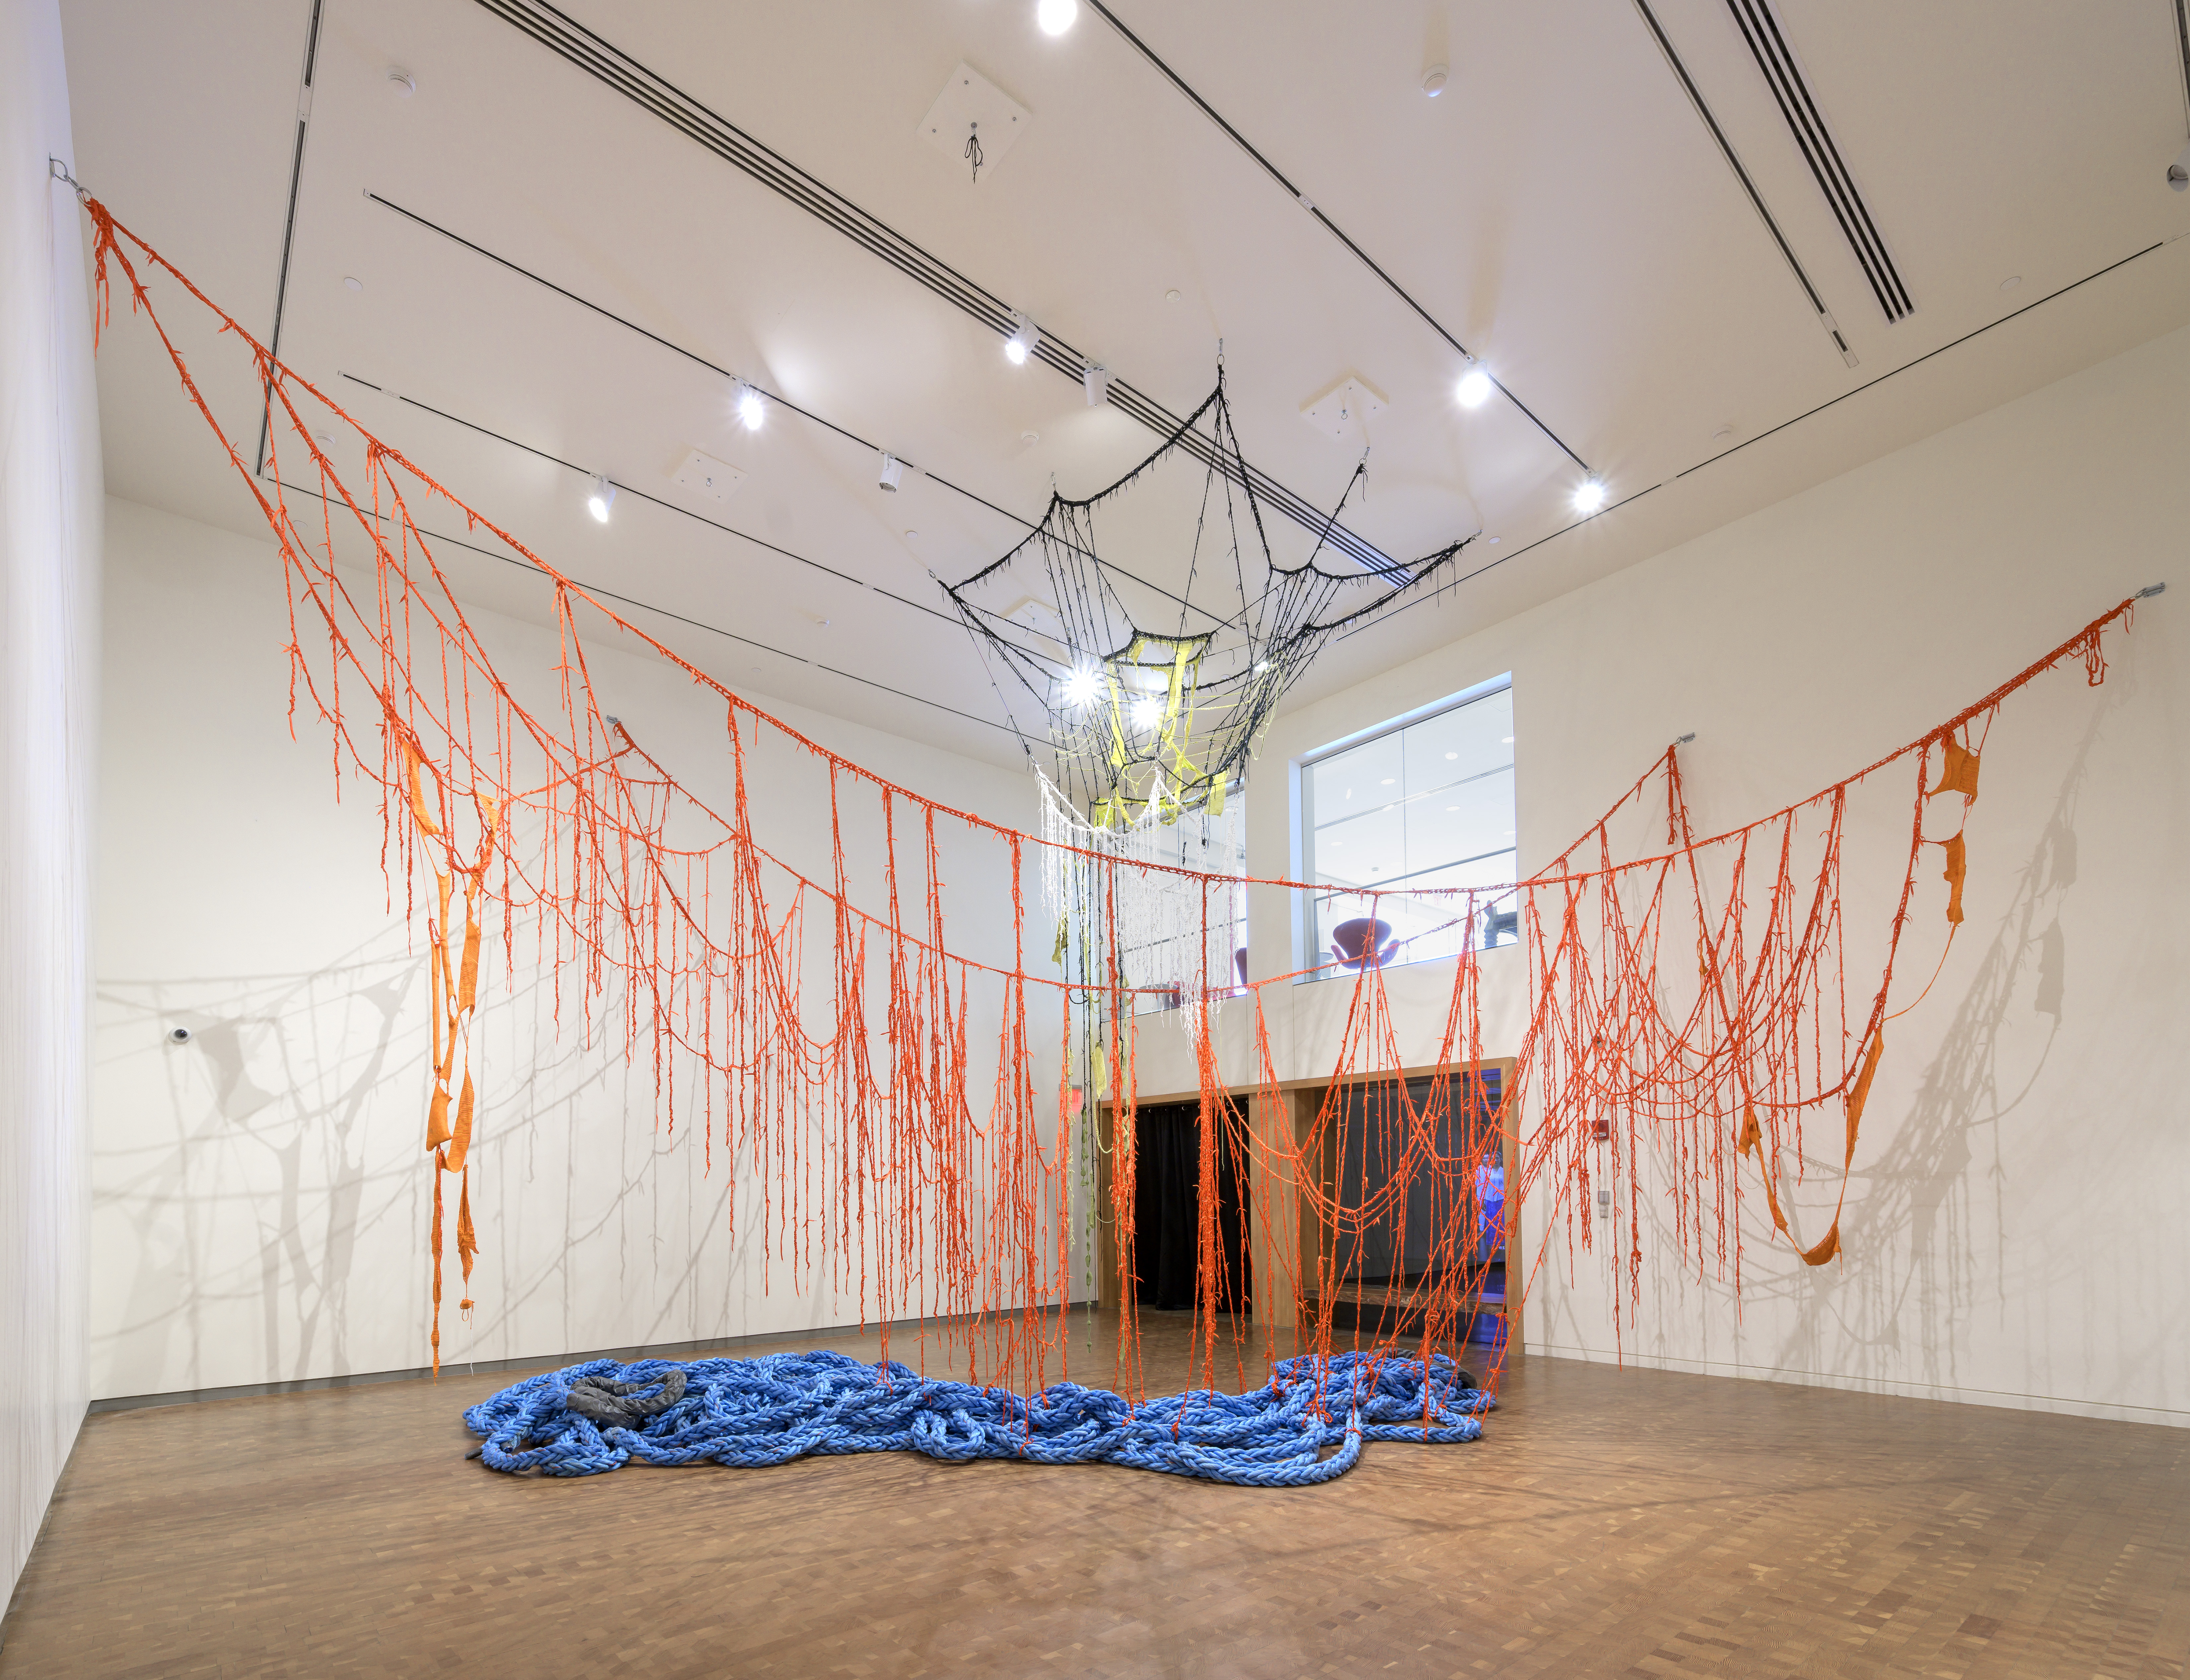 Red ropes hanging from a gallery ceiling with large knotted blue rope laying on the gallery floor